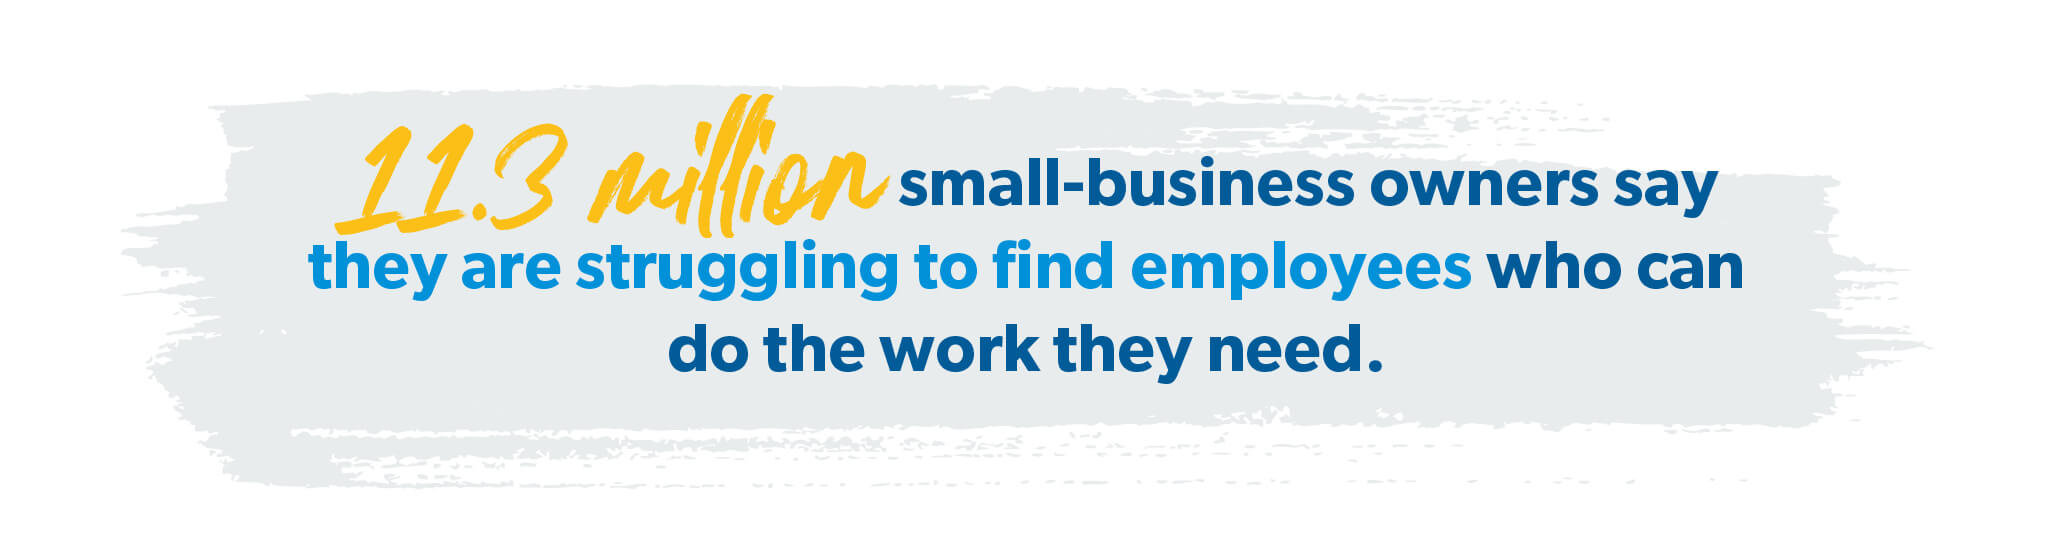 11.3 million small-business owners say they are struggling to find employees who can do the work they need